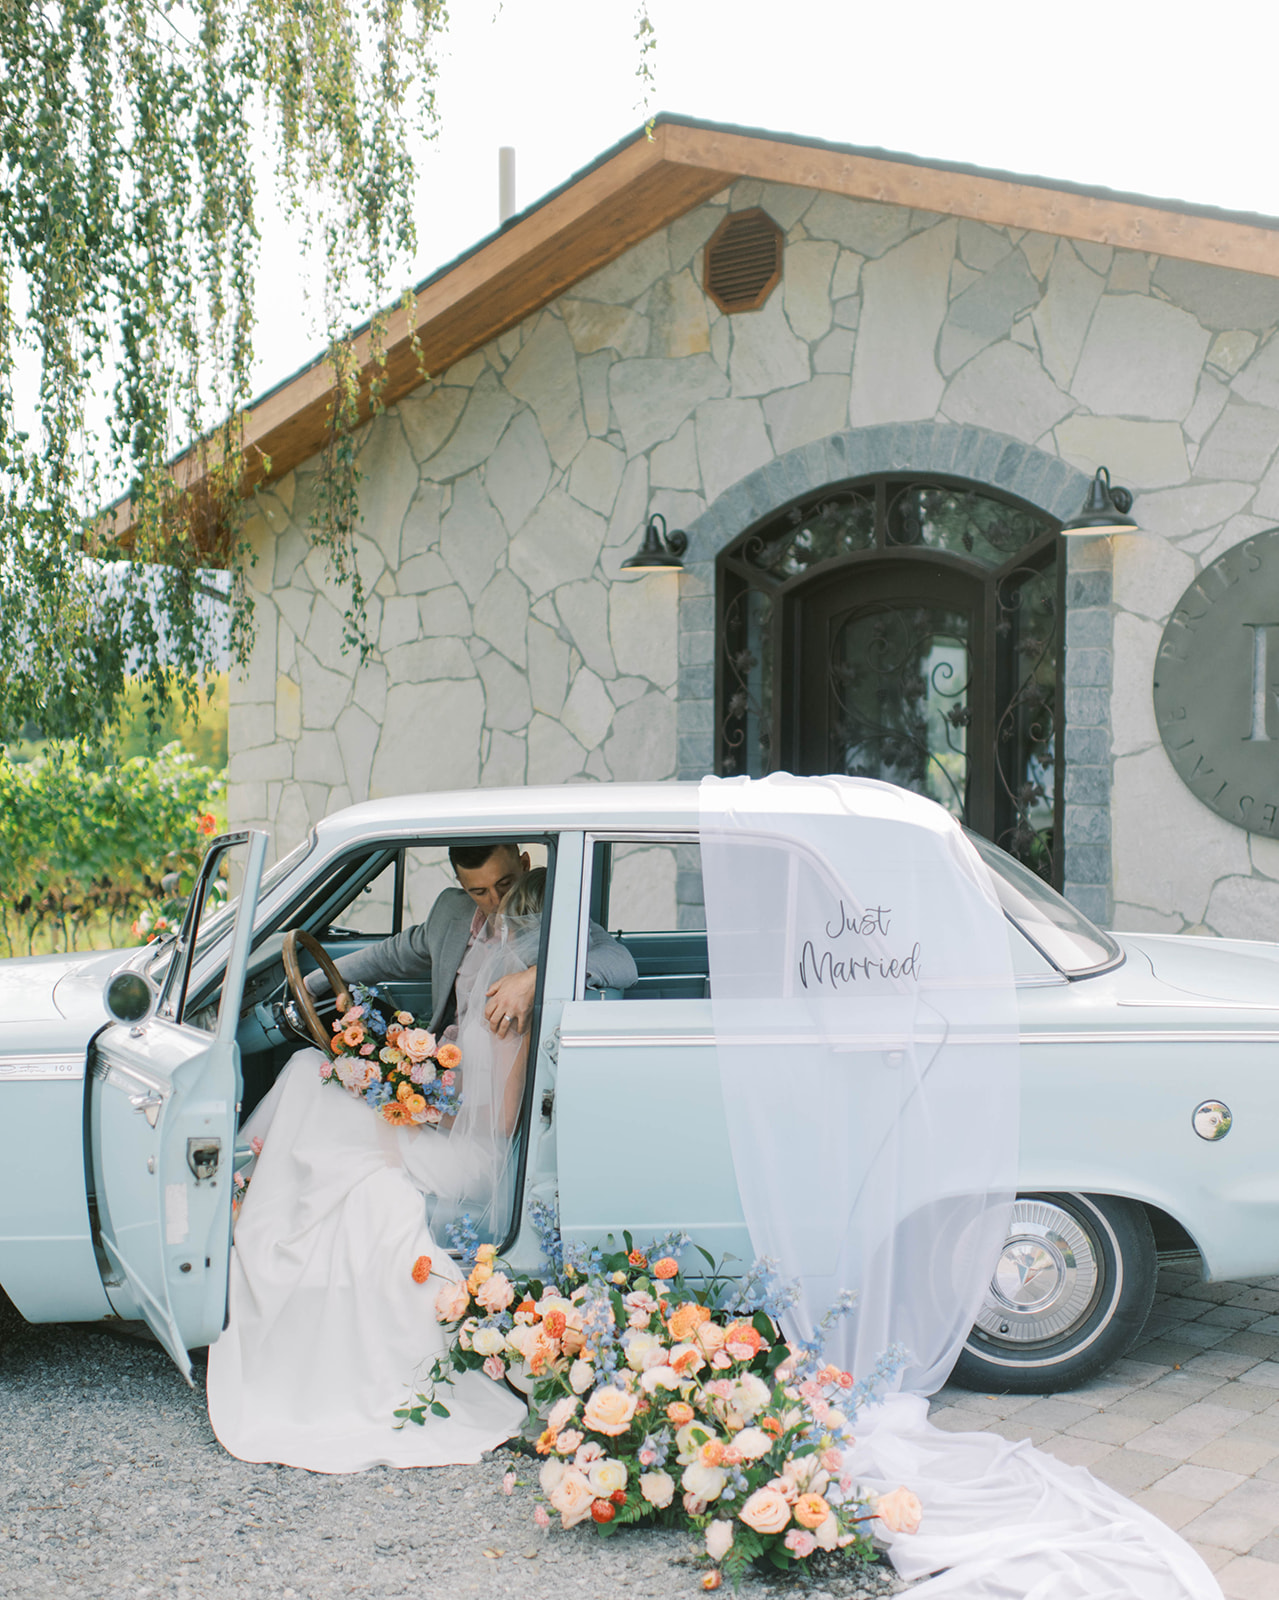 Bride's veil gracefully draped on blue vintage car with just married sign by Aspen Etched, adding a touch of romance to the getaway vehicle, lush floral arrangements adorning a classic car, transforming it into a stunning centrepiece for a vintage-inspired wedding, bride and groom sharing an intimate moment in blue getaway car 